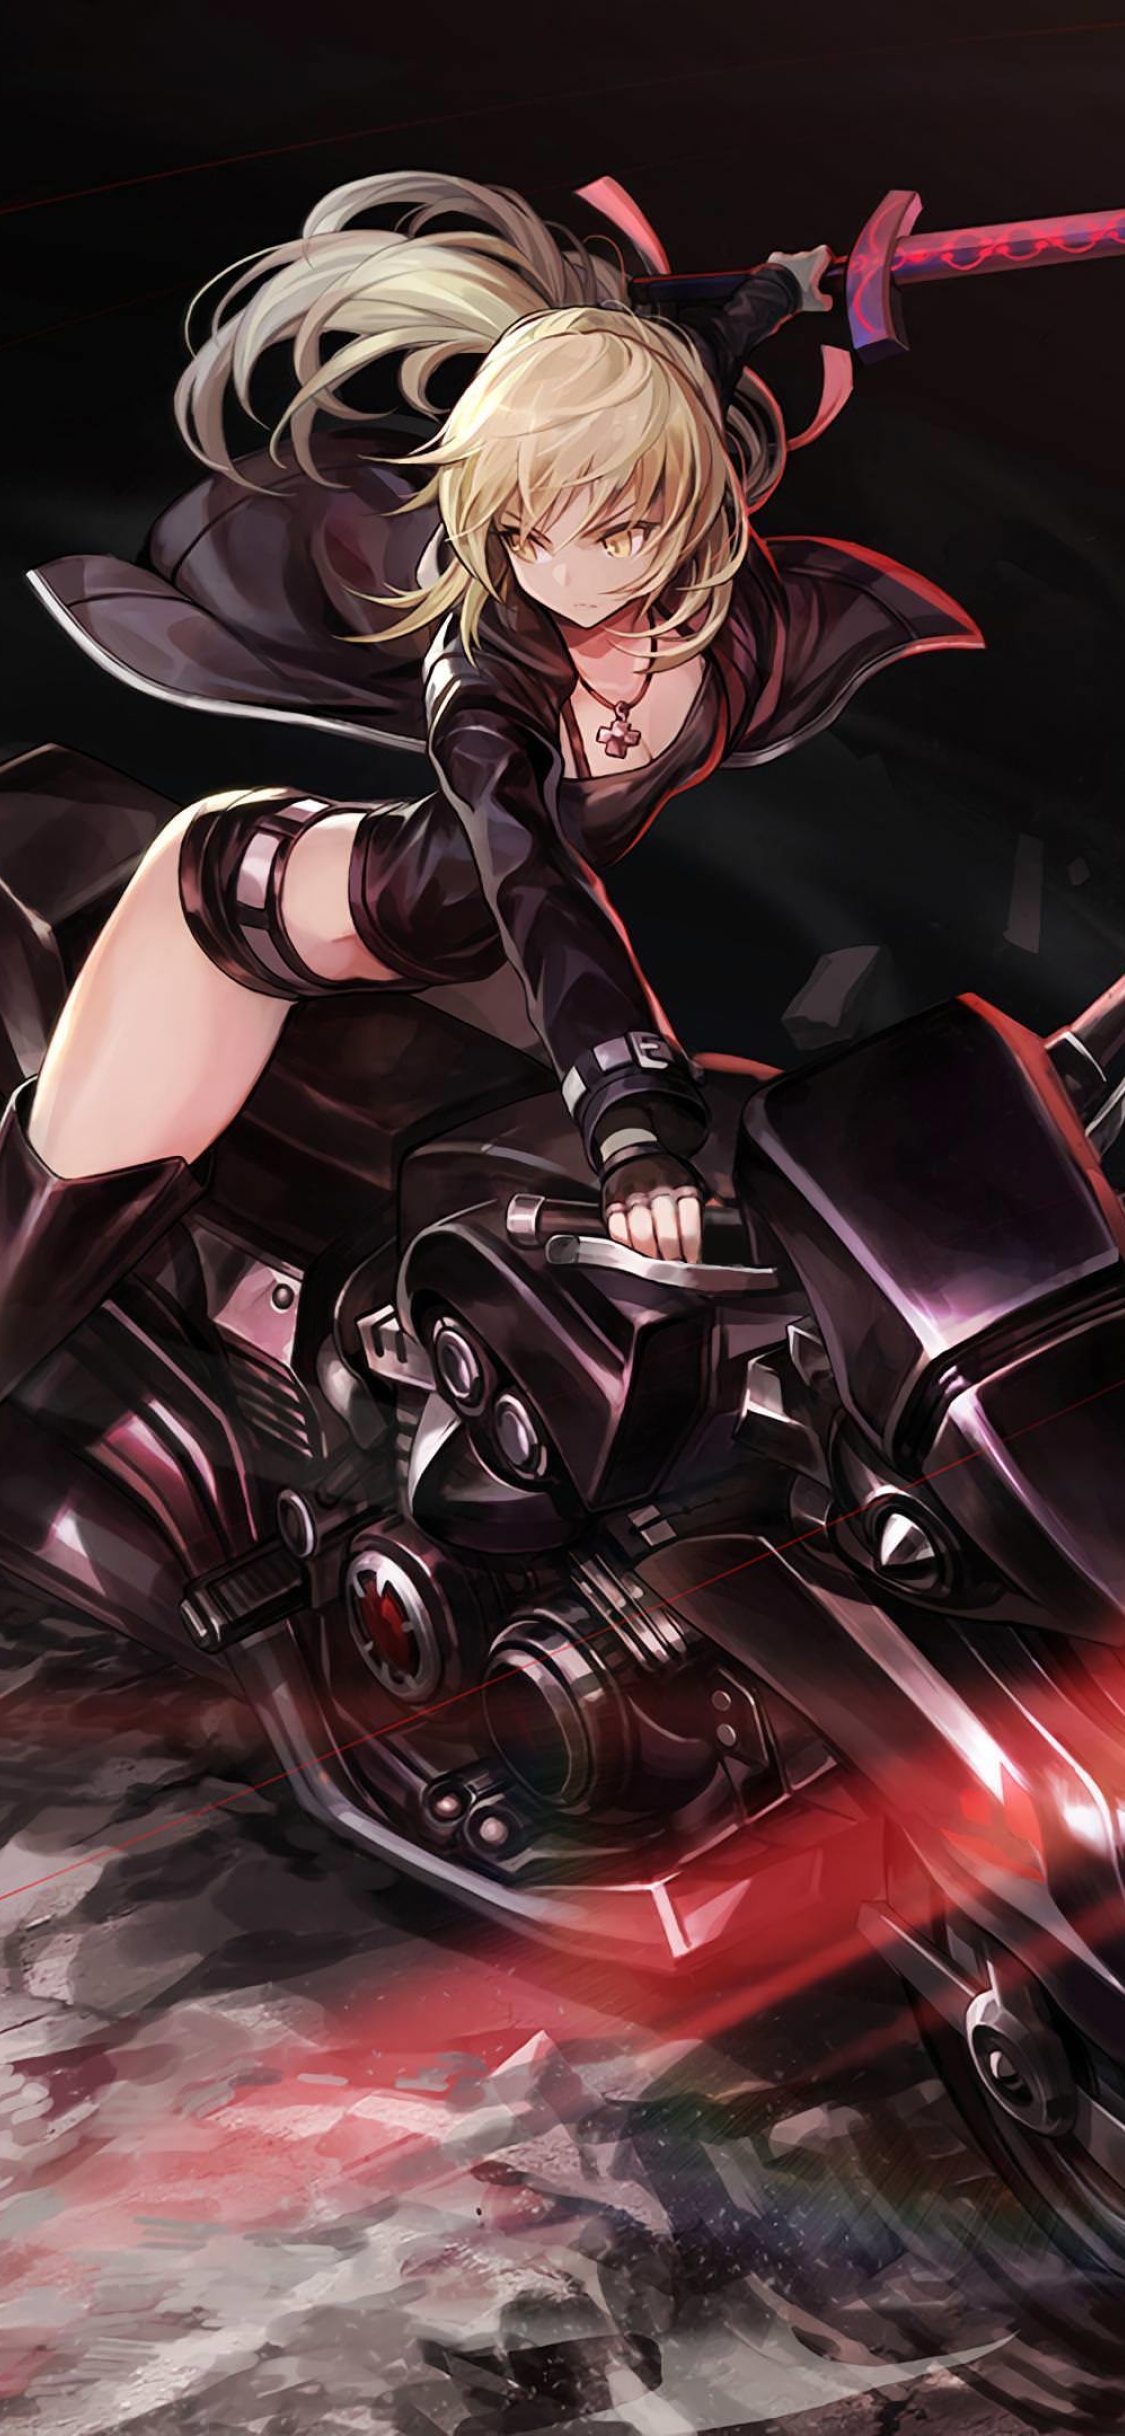 1125x2436 Saber Alter Fate Iphone Xs Iphone 10 Iphone X Wallpaper Hd Anime 4k Wallpapers Images Photos And Background Wallpapers Den